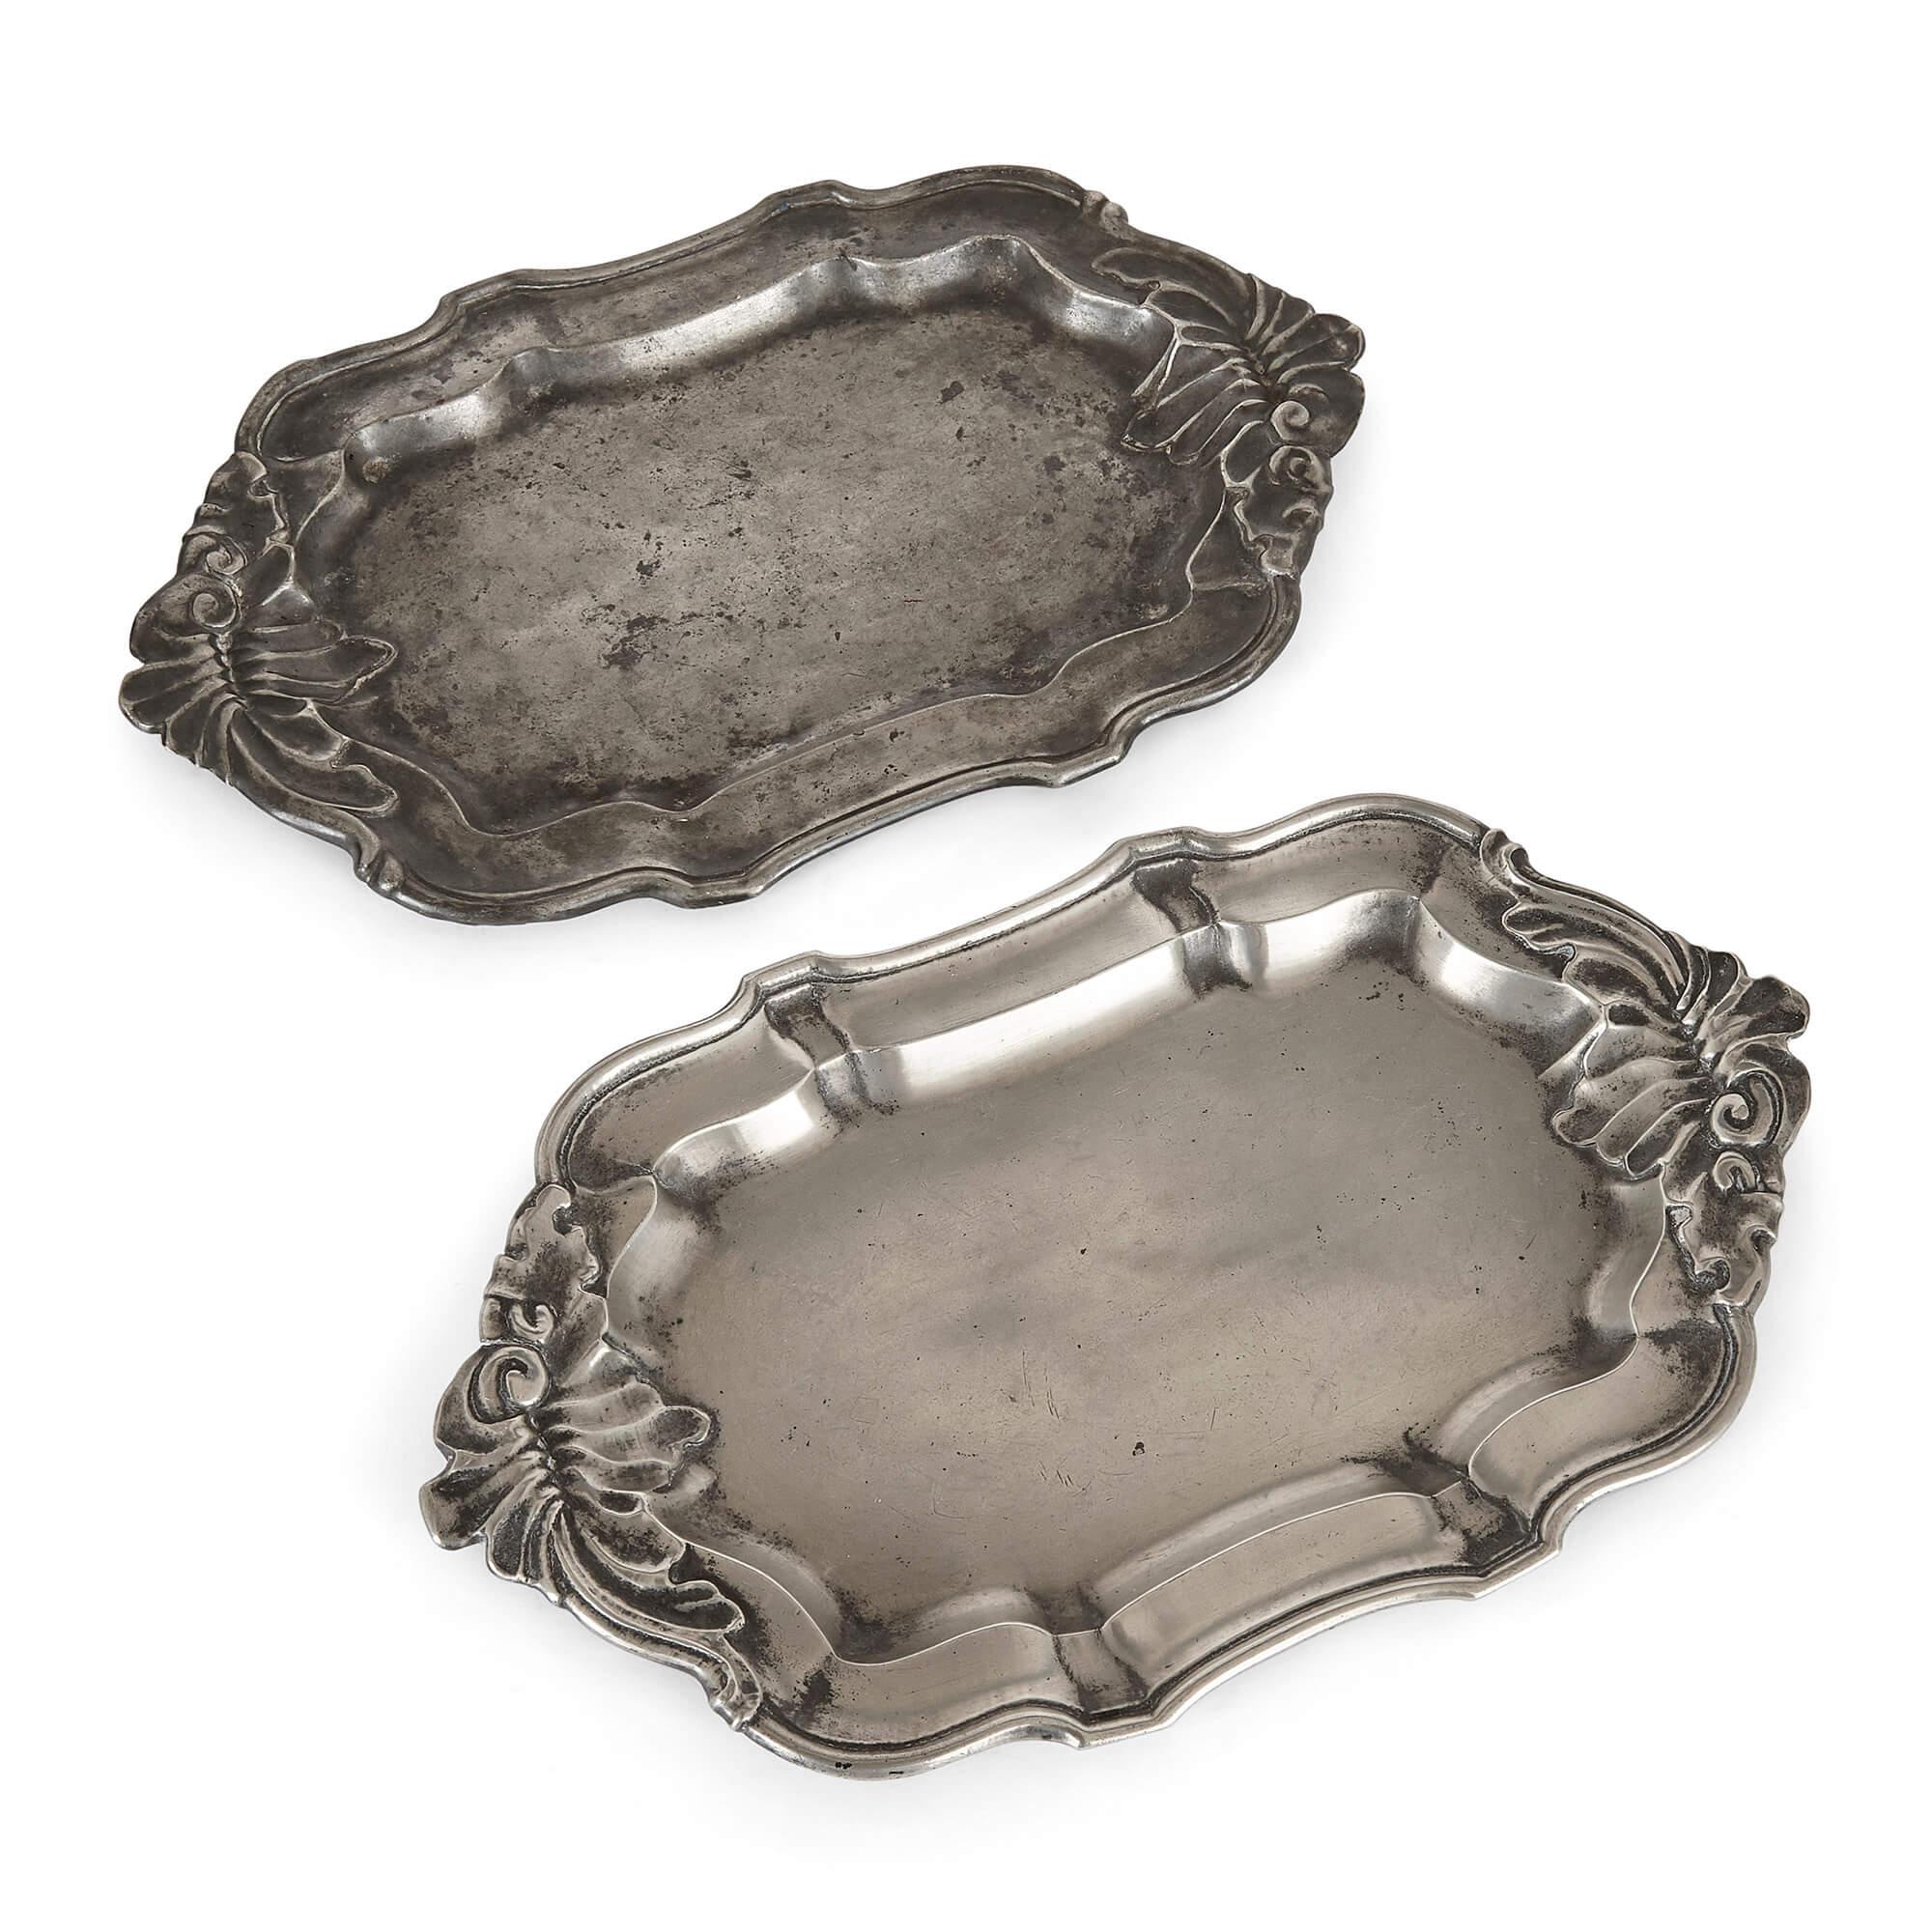 Set of antique German pewter plates
German, 19th Century
Largest plate: Height 4cm, diameter 37cm
Smallest bowl: Height 3cm, diameter 16cm

This eclectic collection of plates is a fine example of late 18th and early 19th century German design.